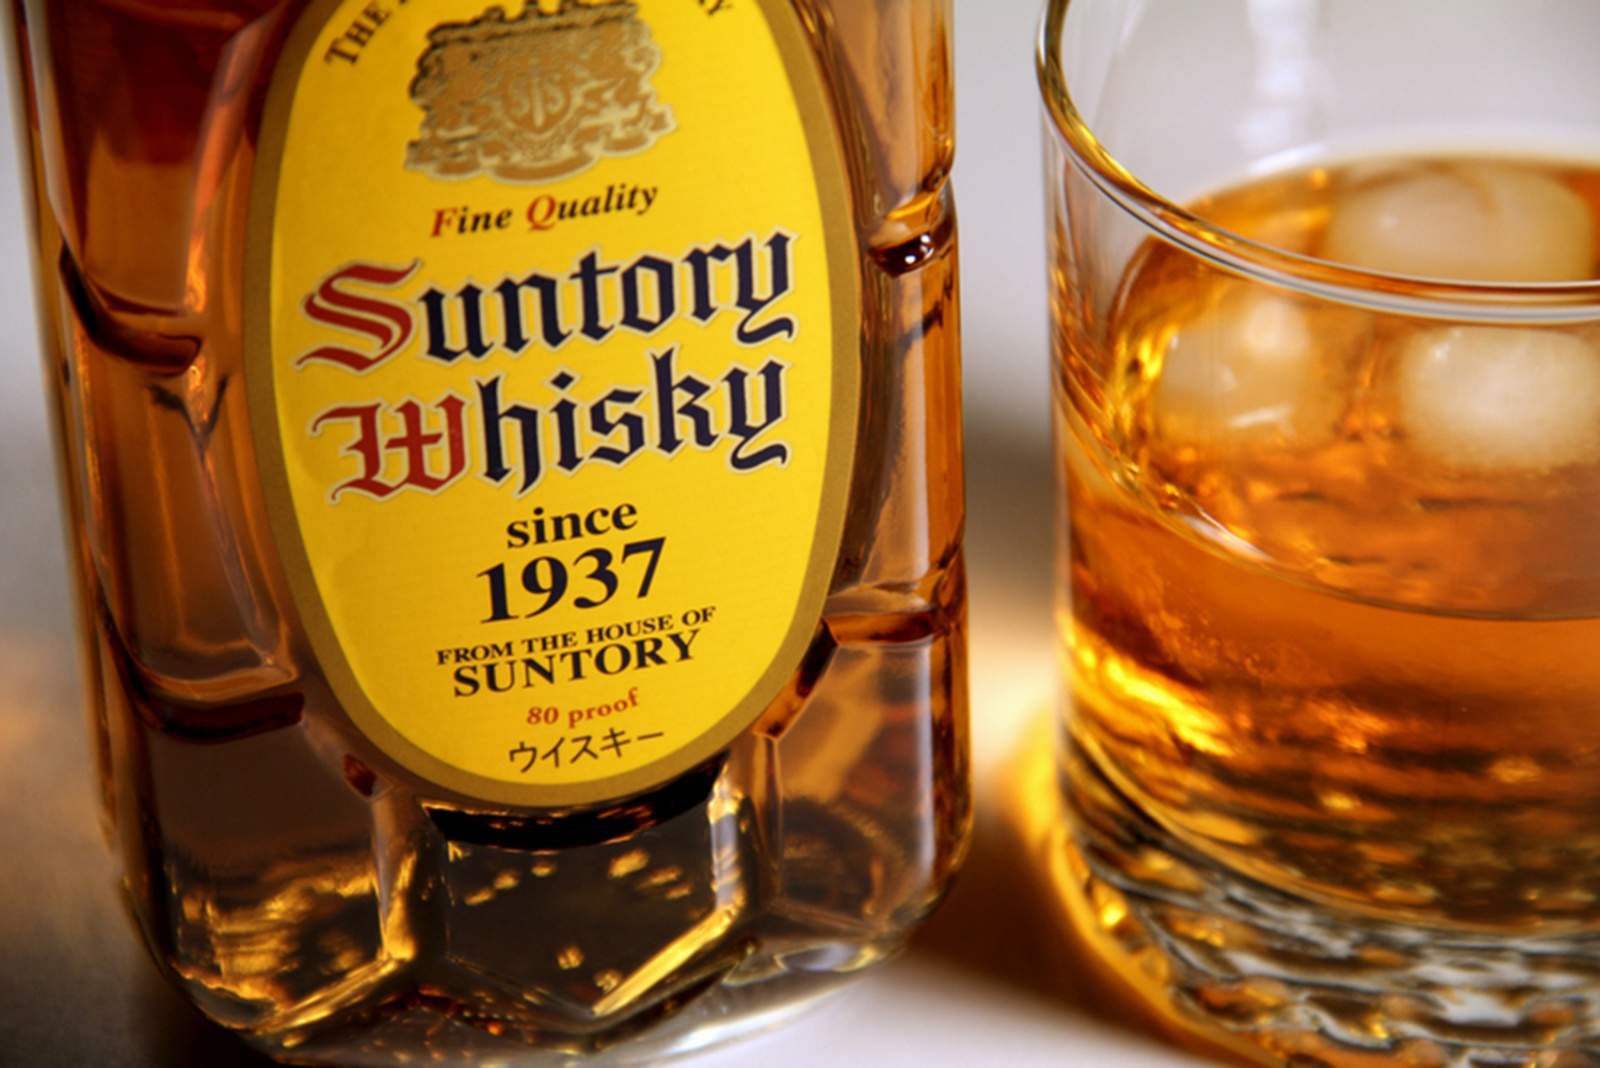 Suntory whiskey mellows with age, but the company wants to know how it tastes after time in space.